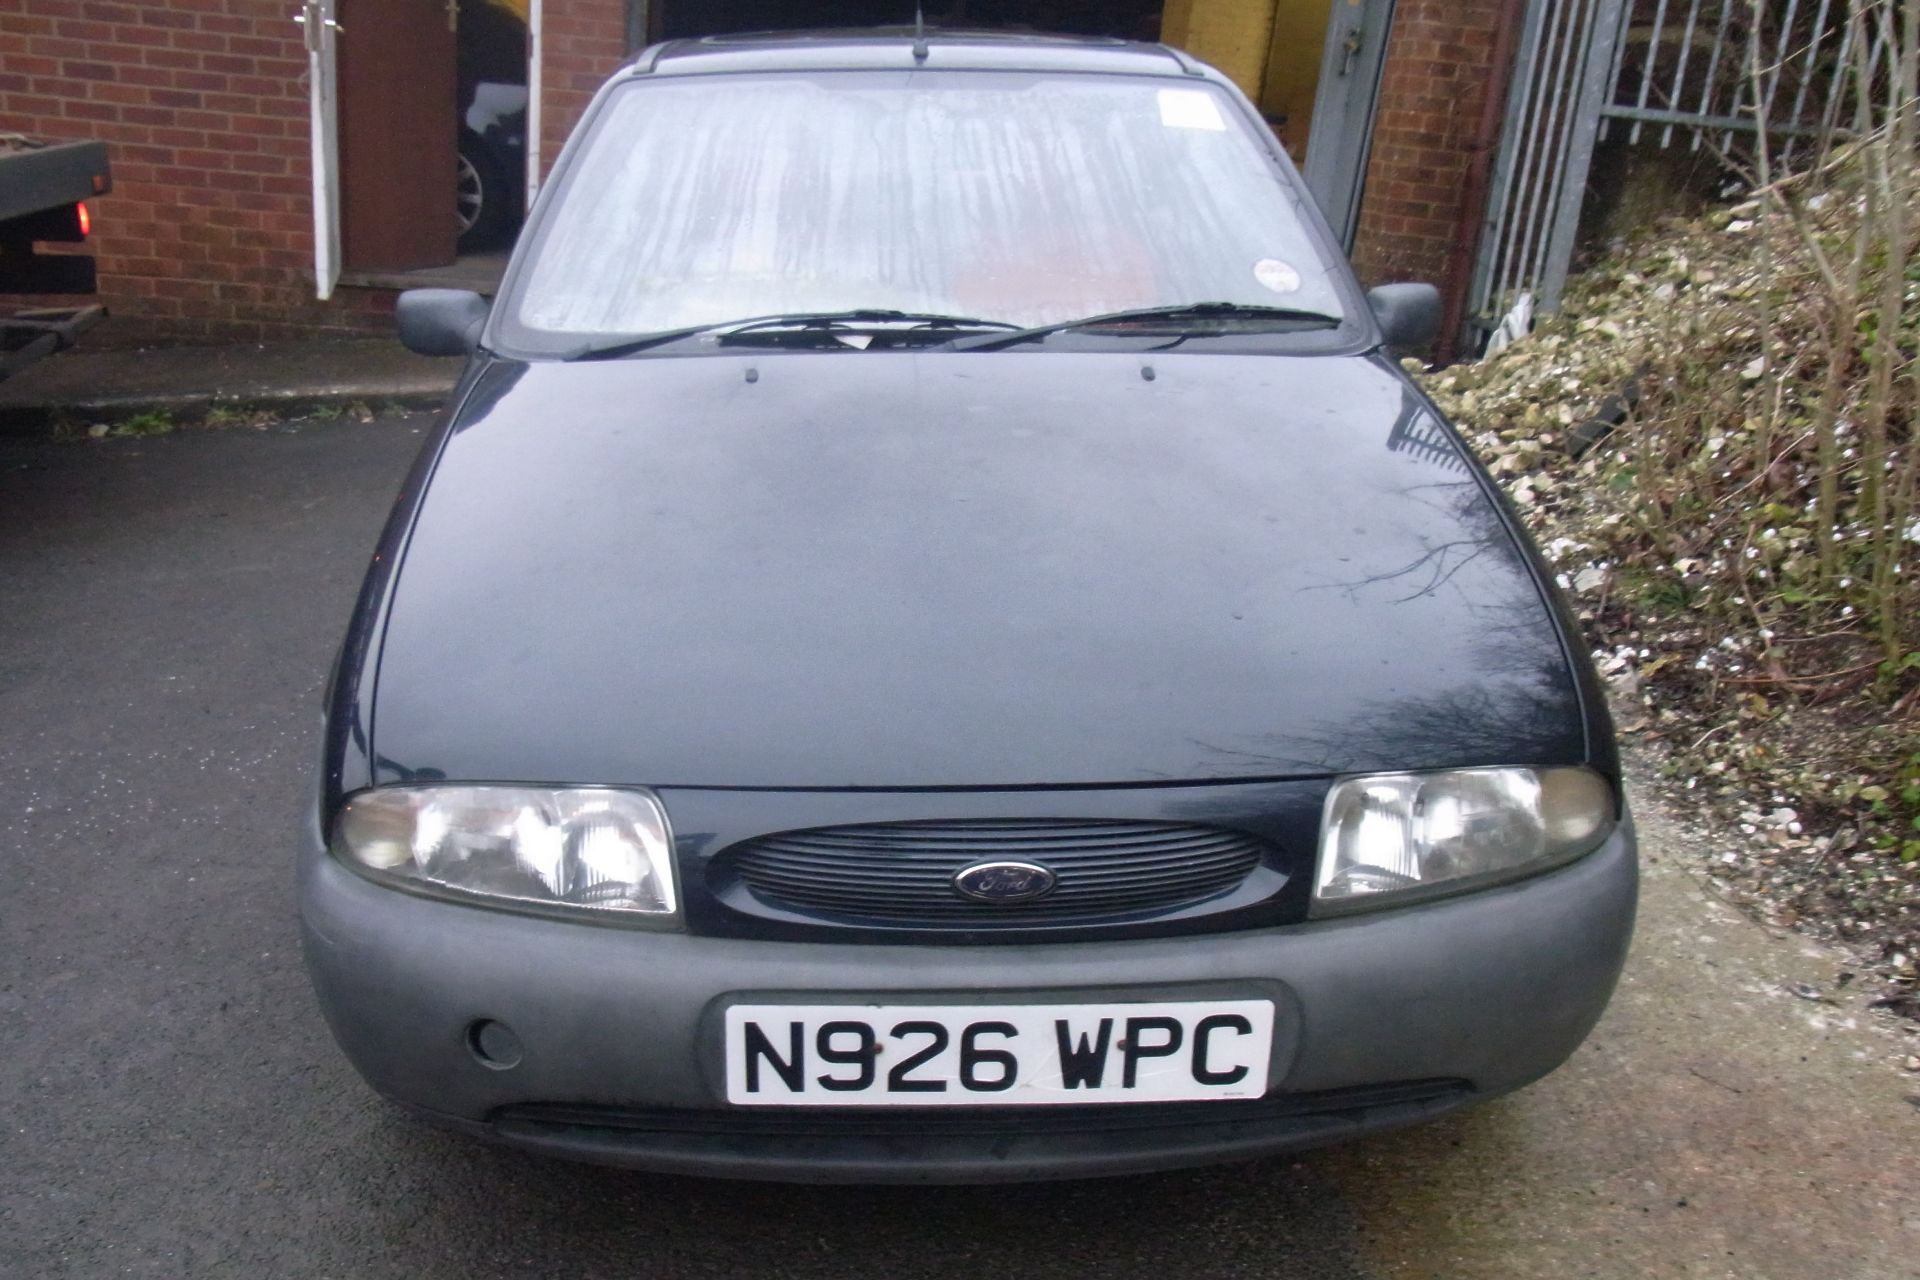 N926 WPC Ford Fiesta LX with V5 - No Key